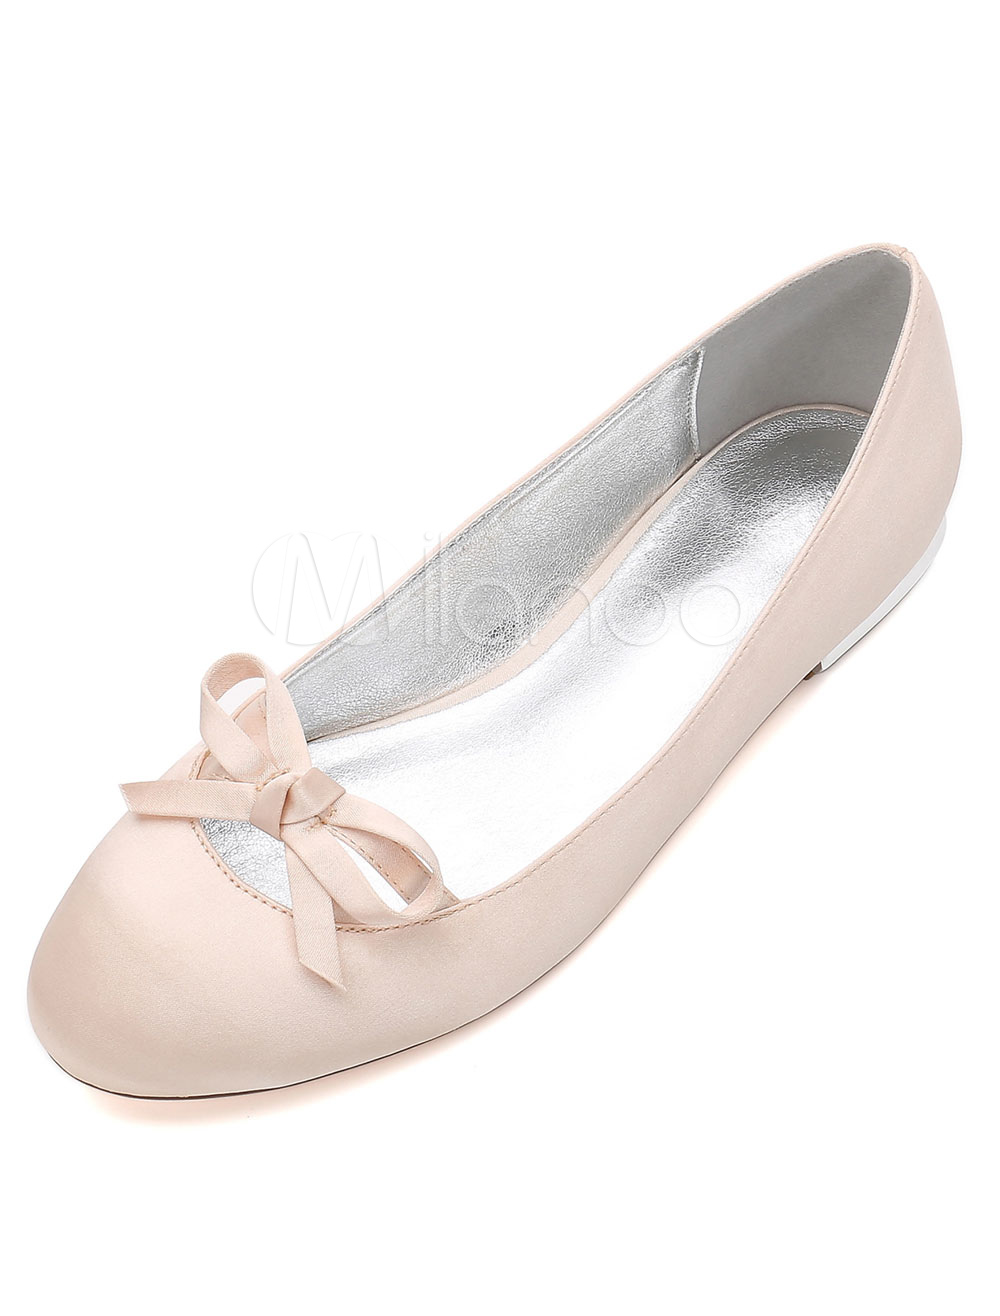 champagne color flat shoes